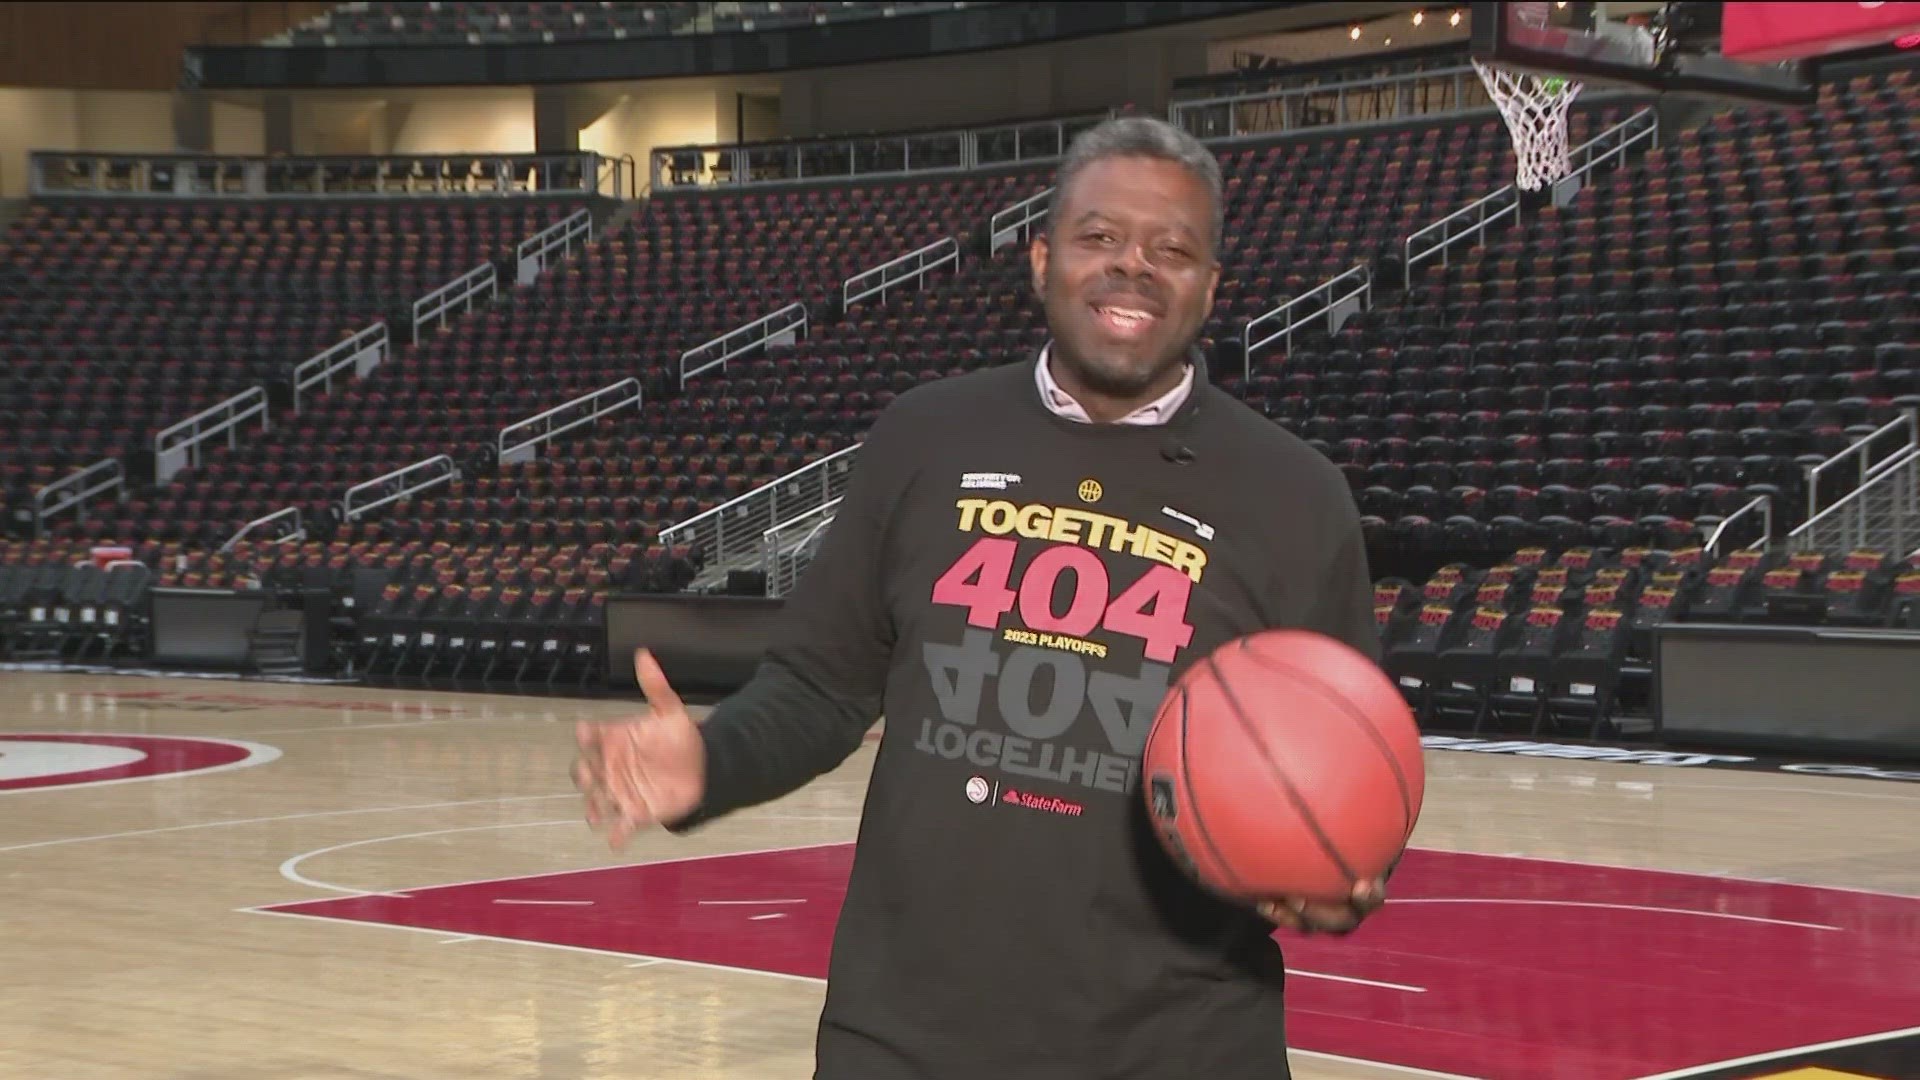 11Alive Meteorologist Chesley McNeil was at State Farm Arena Friday morning to show off the scene.